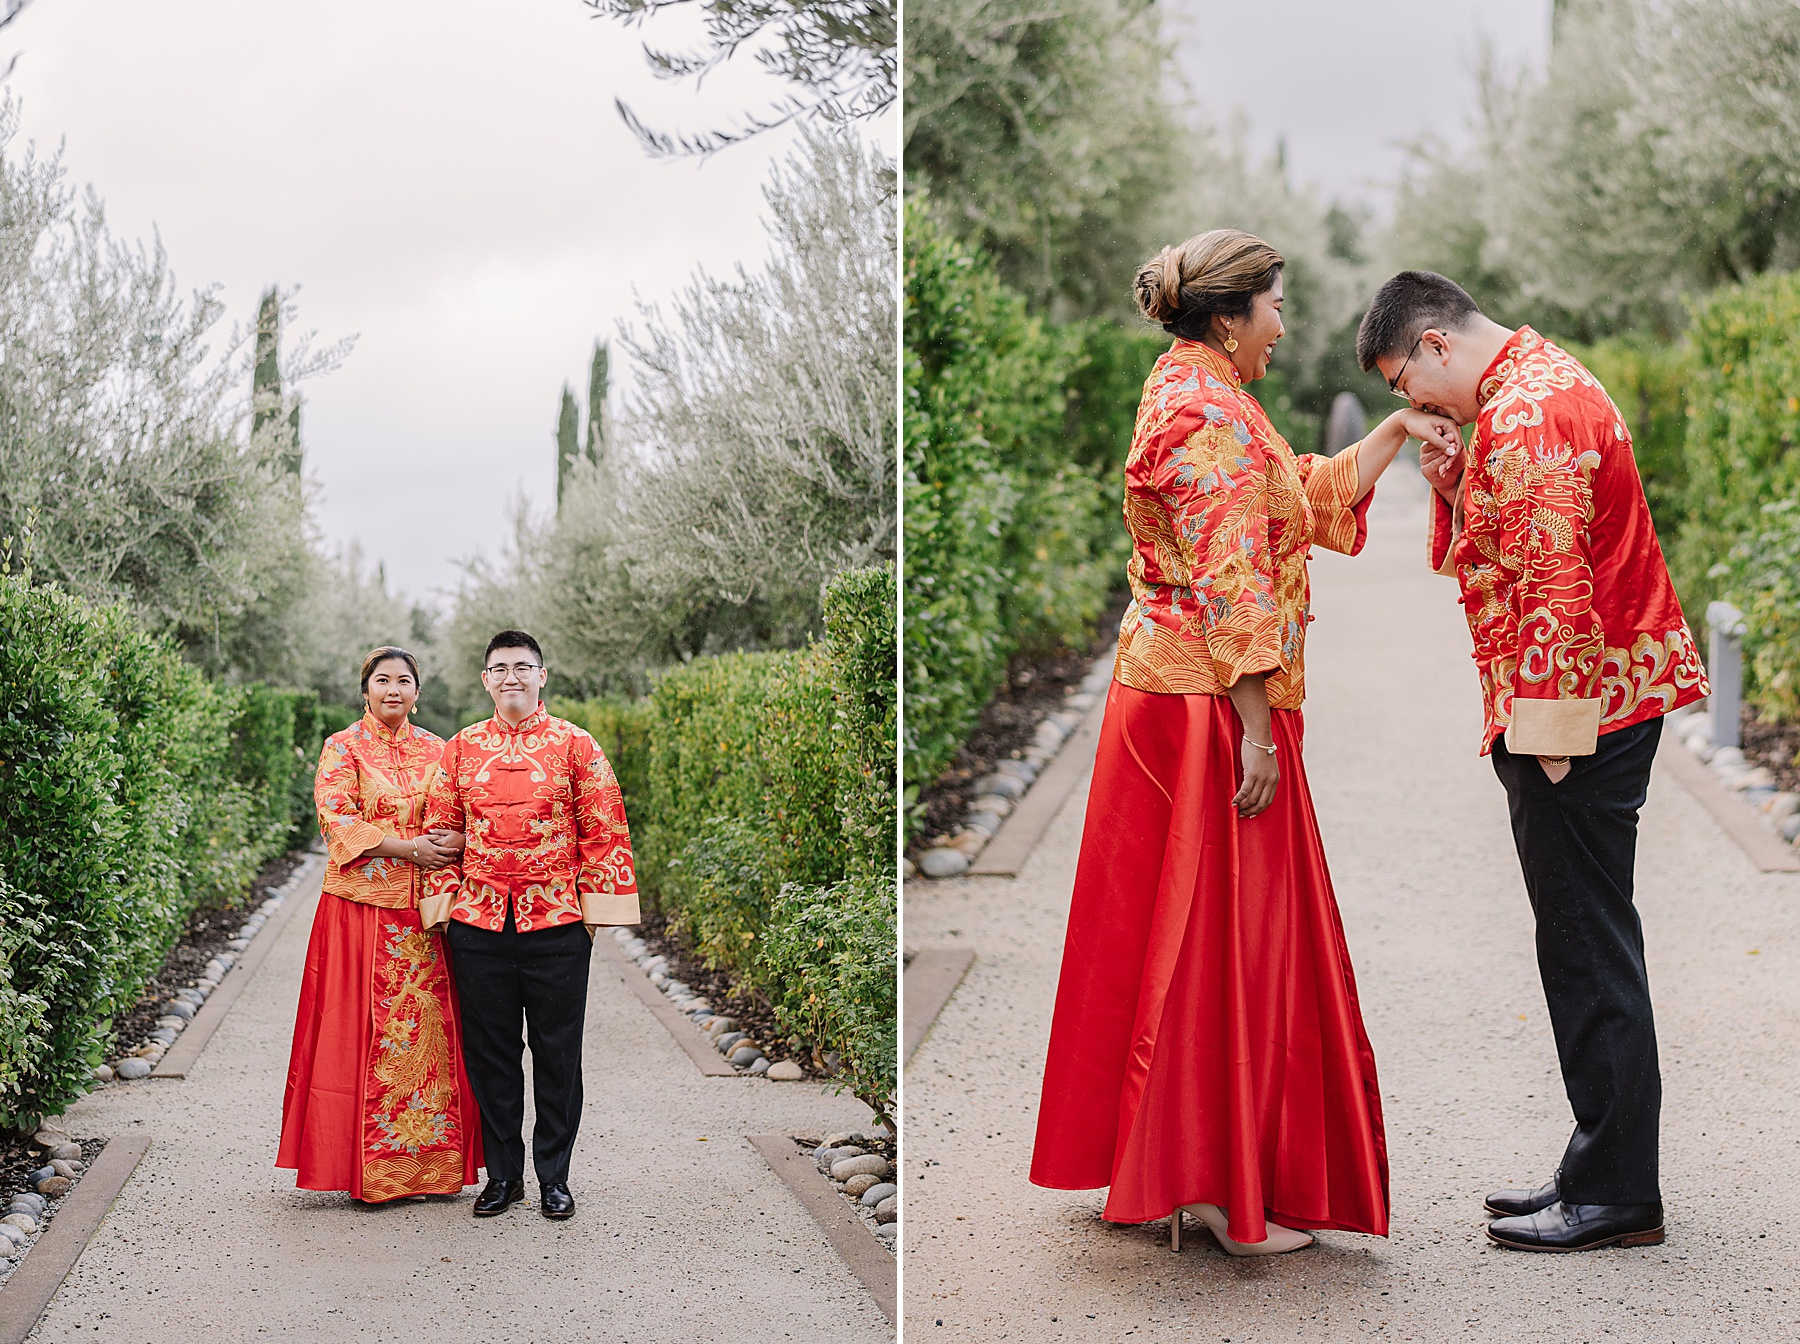 Man and Woman incorporate their traditional attire into their engagement photos captured by San Luis Obispo photographer.